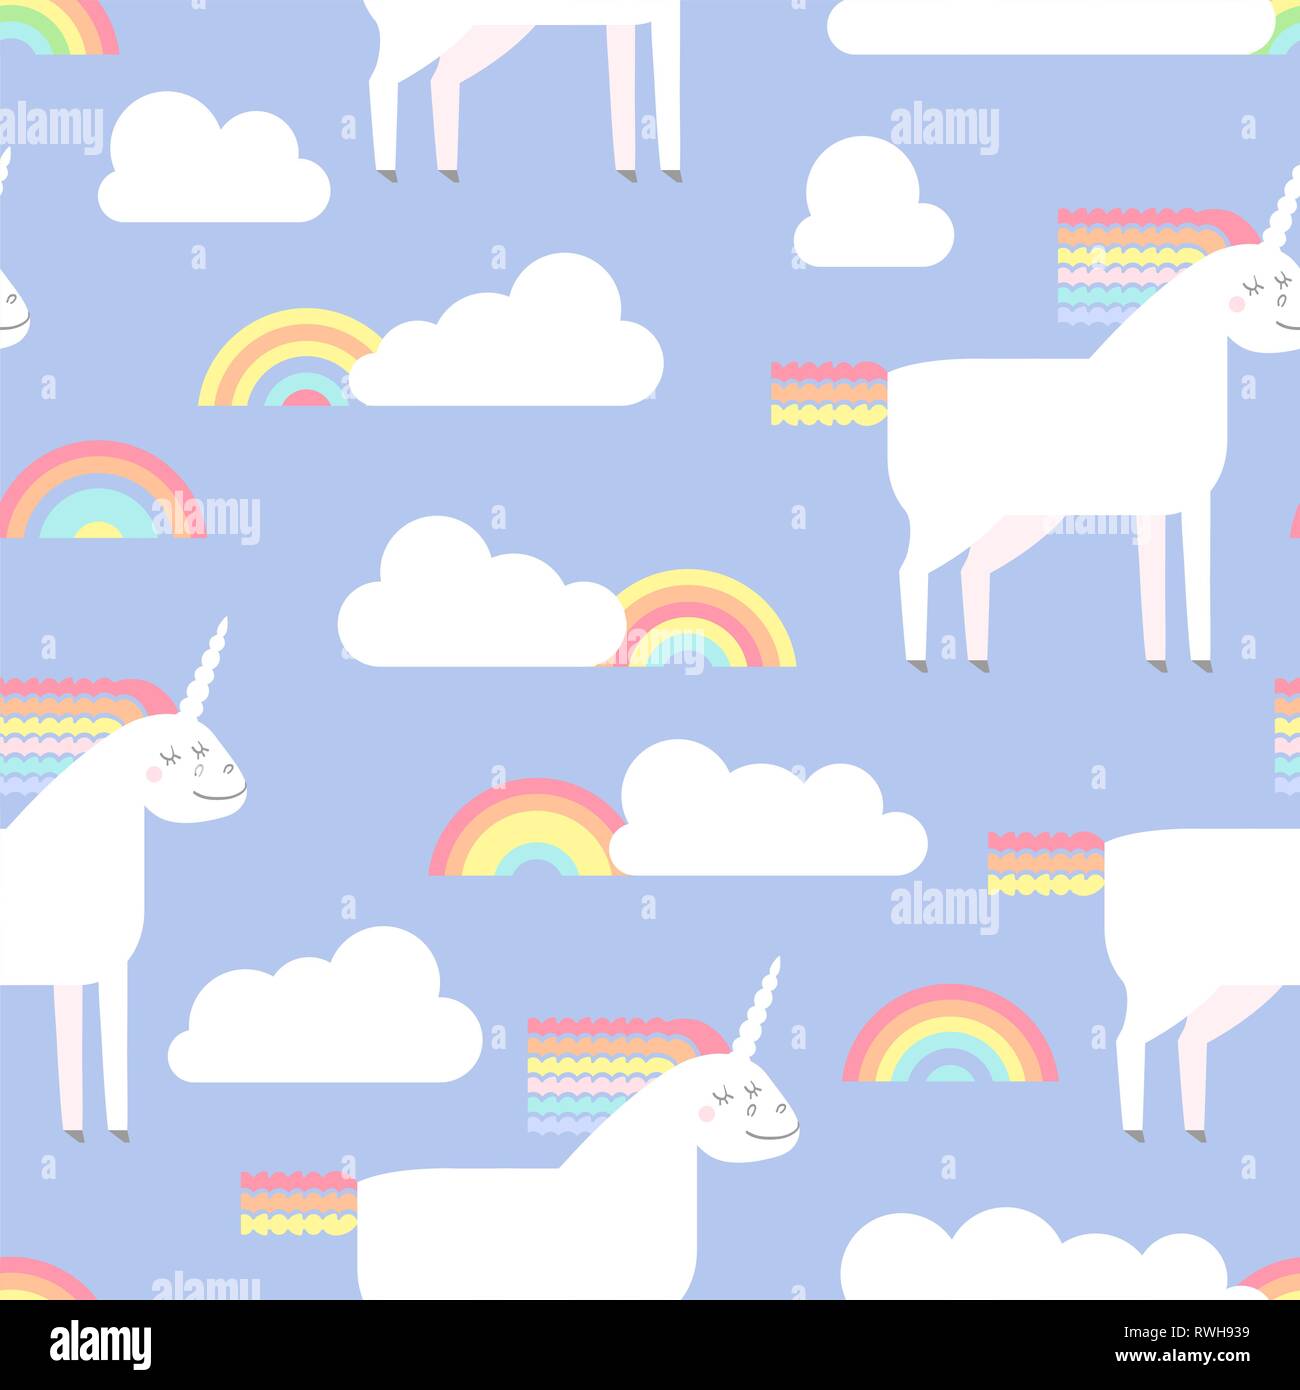 Vector seamless pattern with cute unicorn in flat style. Unicorn with rainbow mane and tail with clouds and rainbows for infant design. Stock Vector